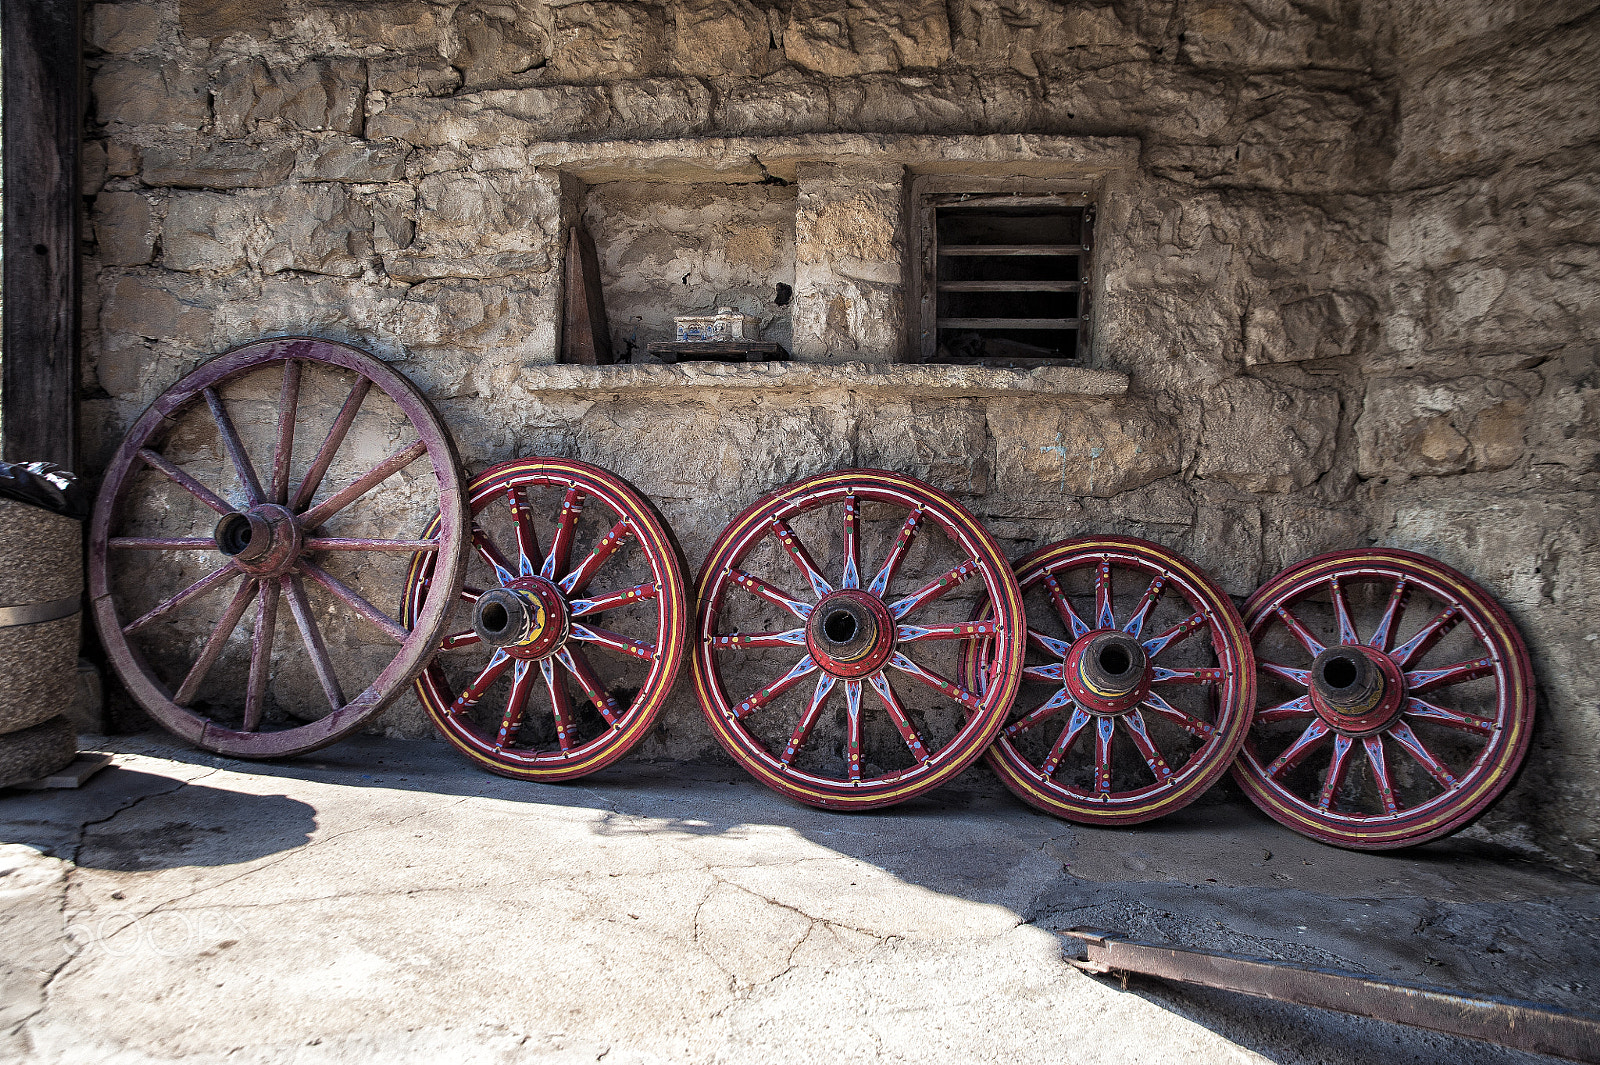 Nikon D700 + Tamron SP 24-70mm F2.8 Di VC USD sample photo. Traditional wagon wheels, rustic, wooden and old. photography